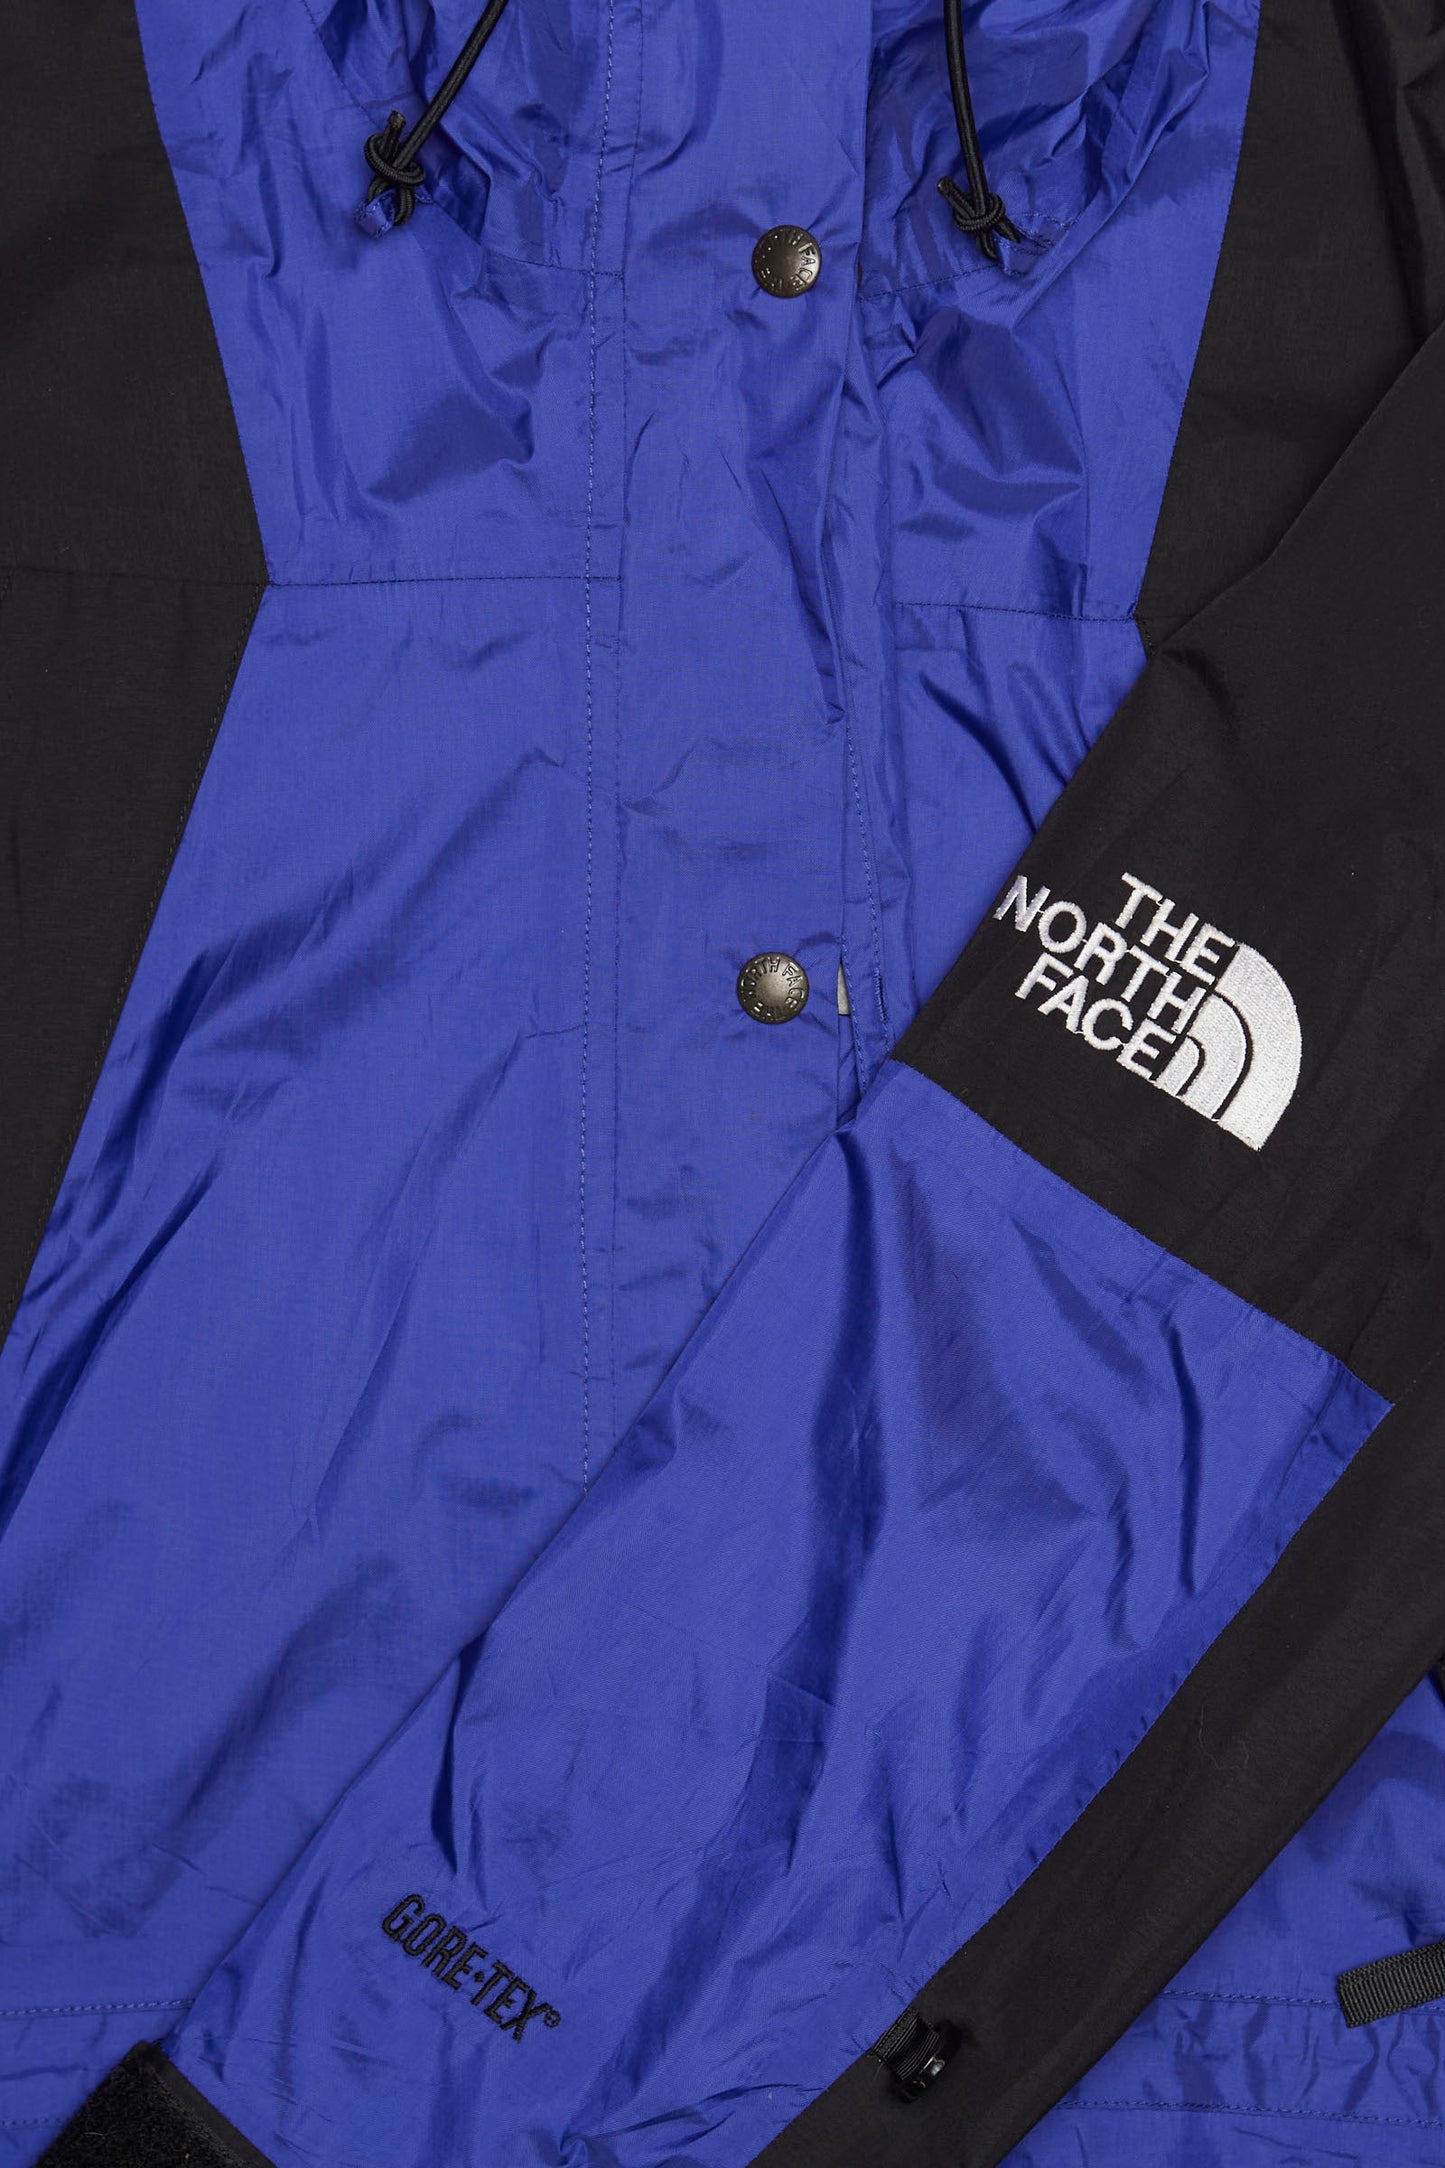 North Face Panel Jacket with Hood - S